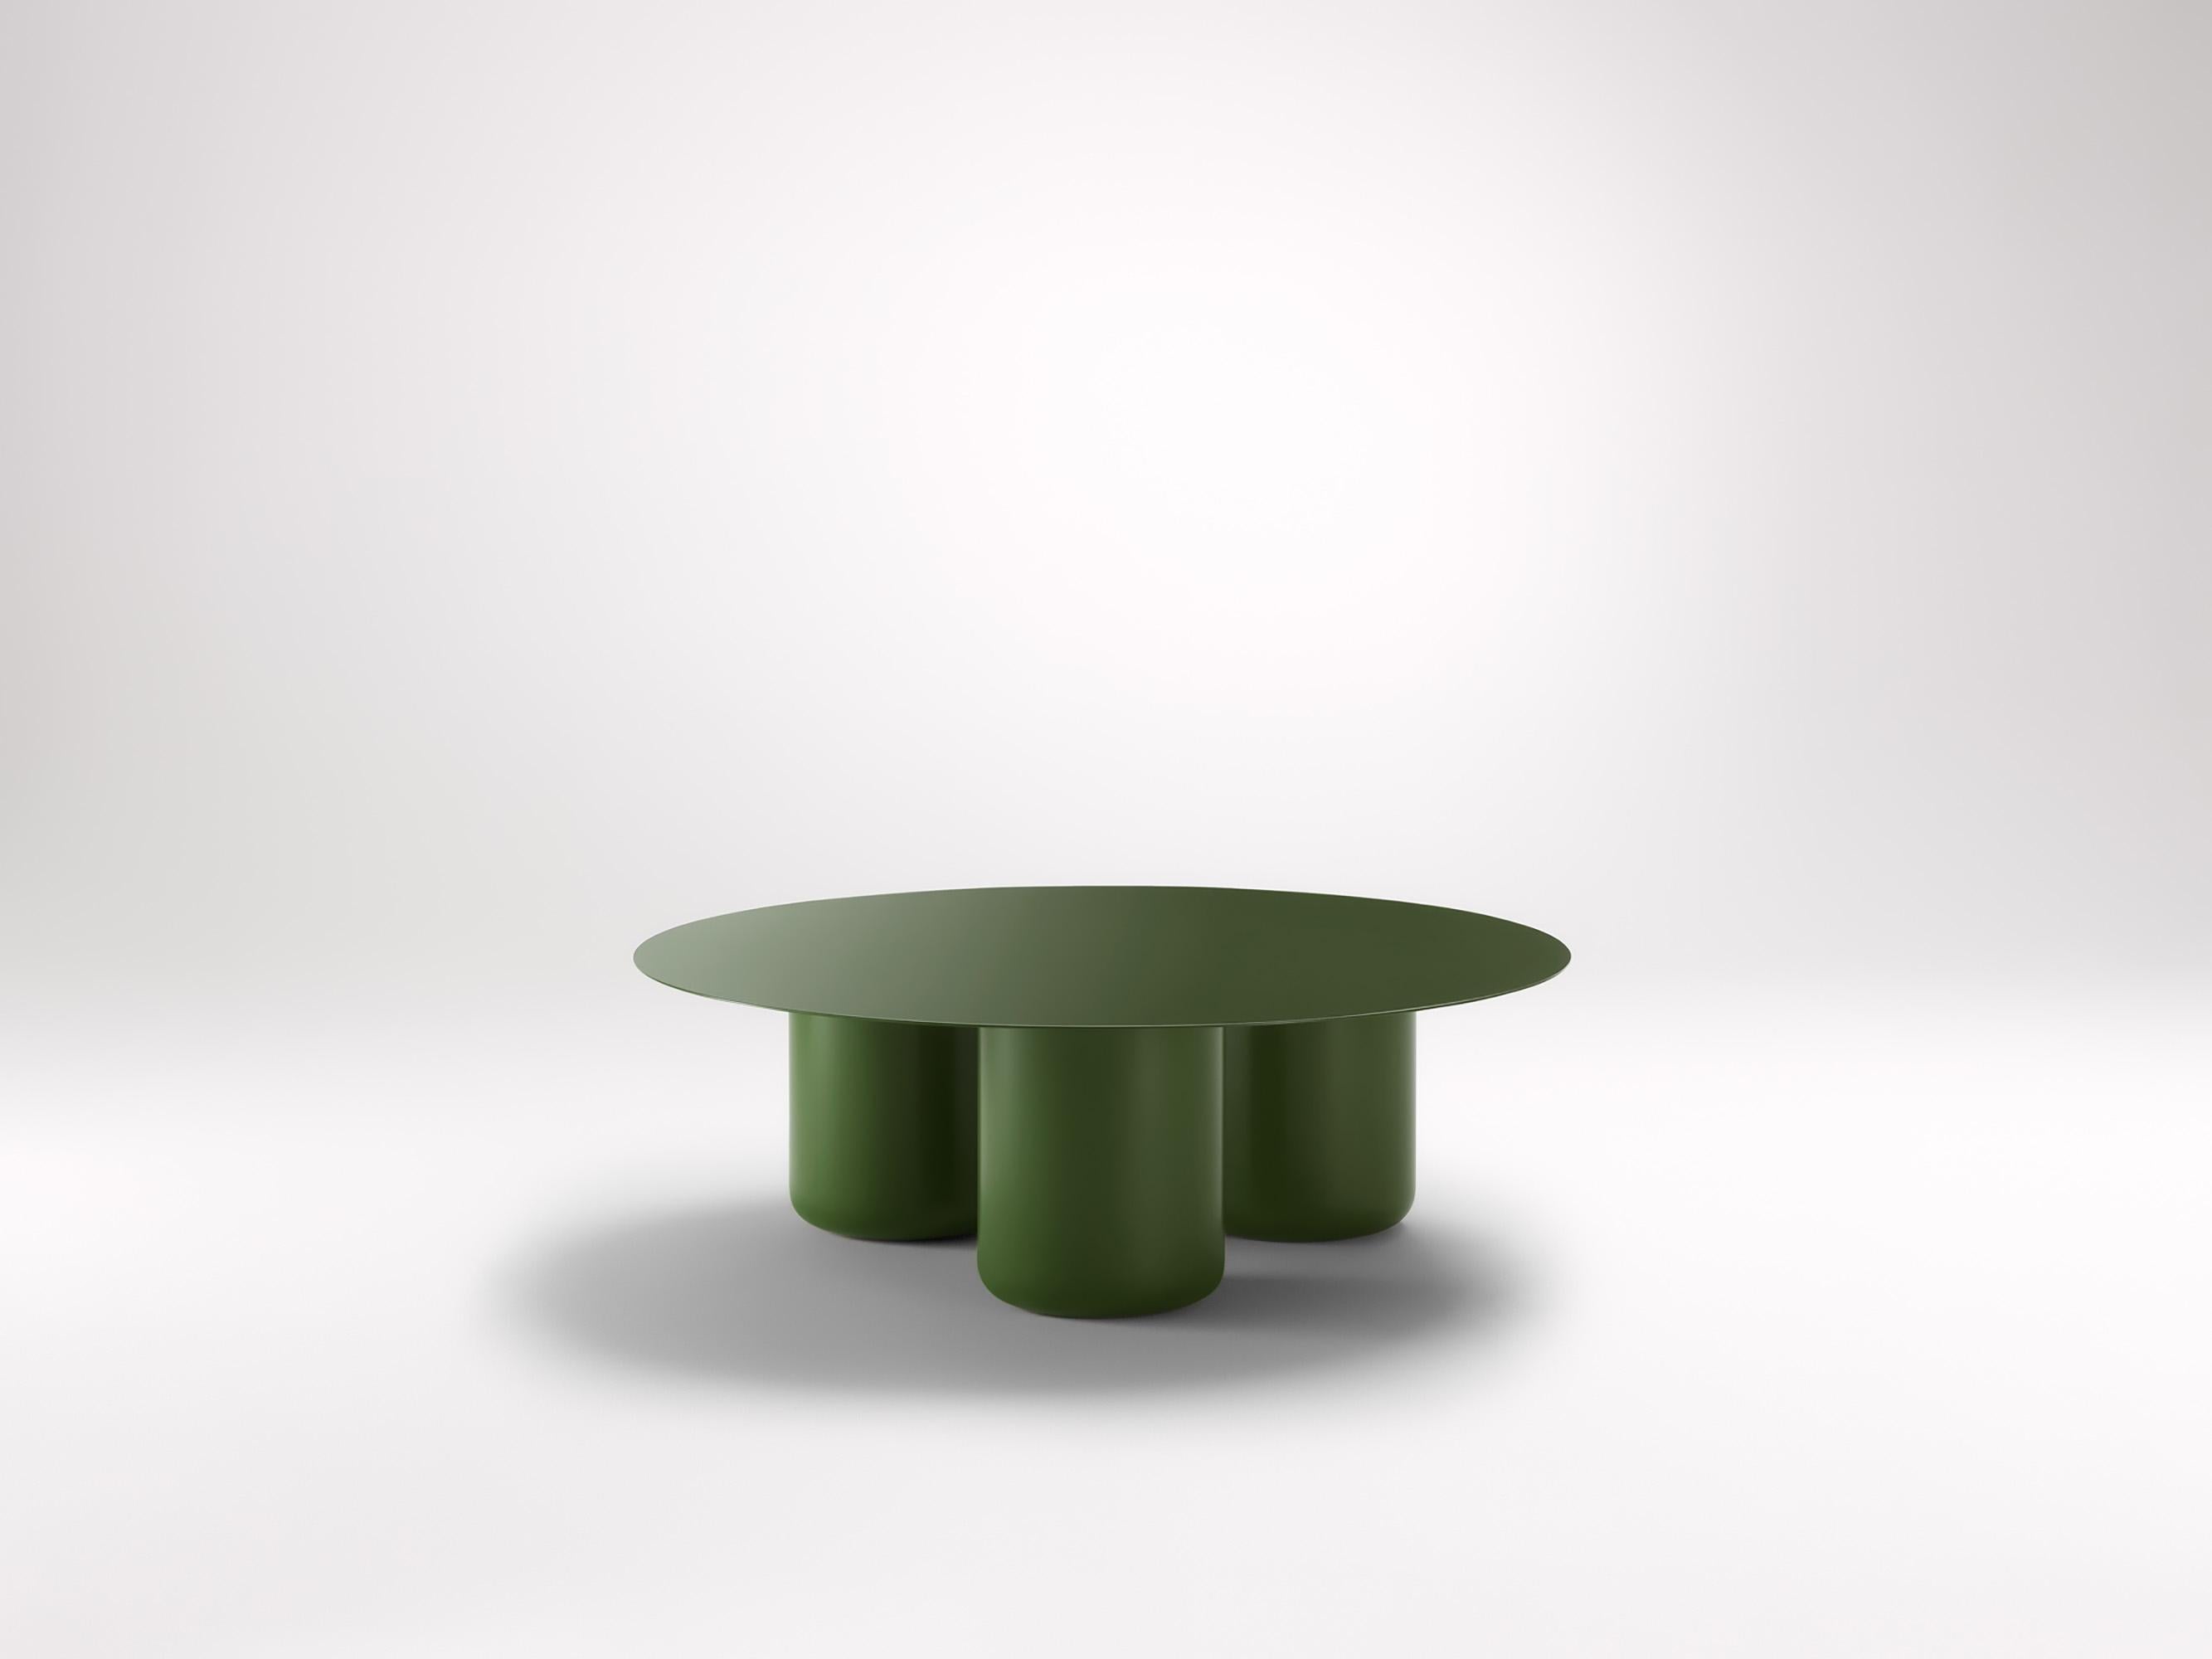 Olive Green Round Table by Coco Flip
Dimensions: D 100 x H 32 / 36 / 40 / 42 cm
Materials: Mild steel, powder-coated with zinc undercoat. 
Weight: 34 kg

Coco Flip is a Melbourne based furniture and lighting design studio, run by us, Kate Stokes and